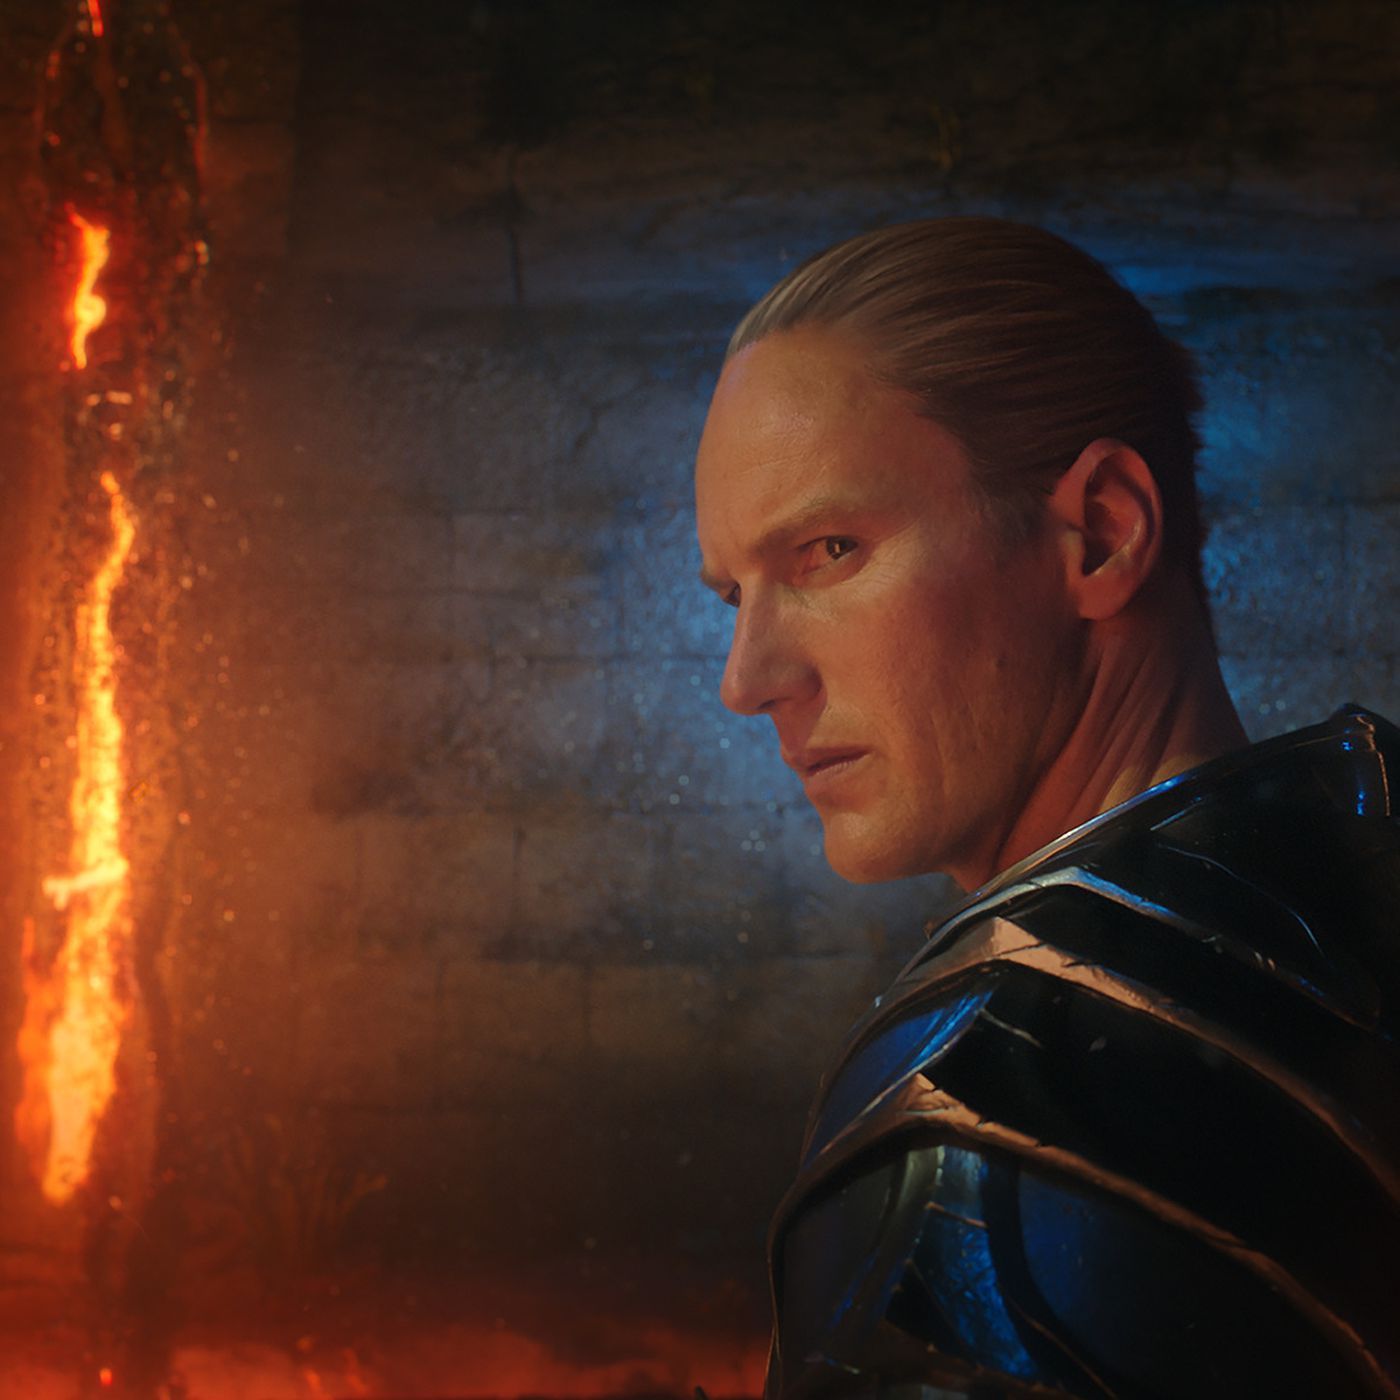 Aquaman's villain Orm may actually have a point about